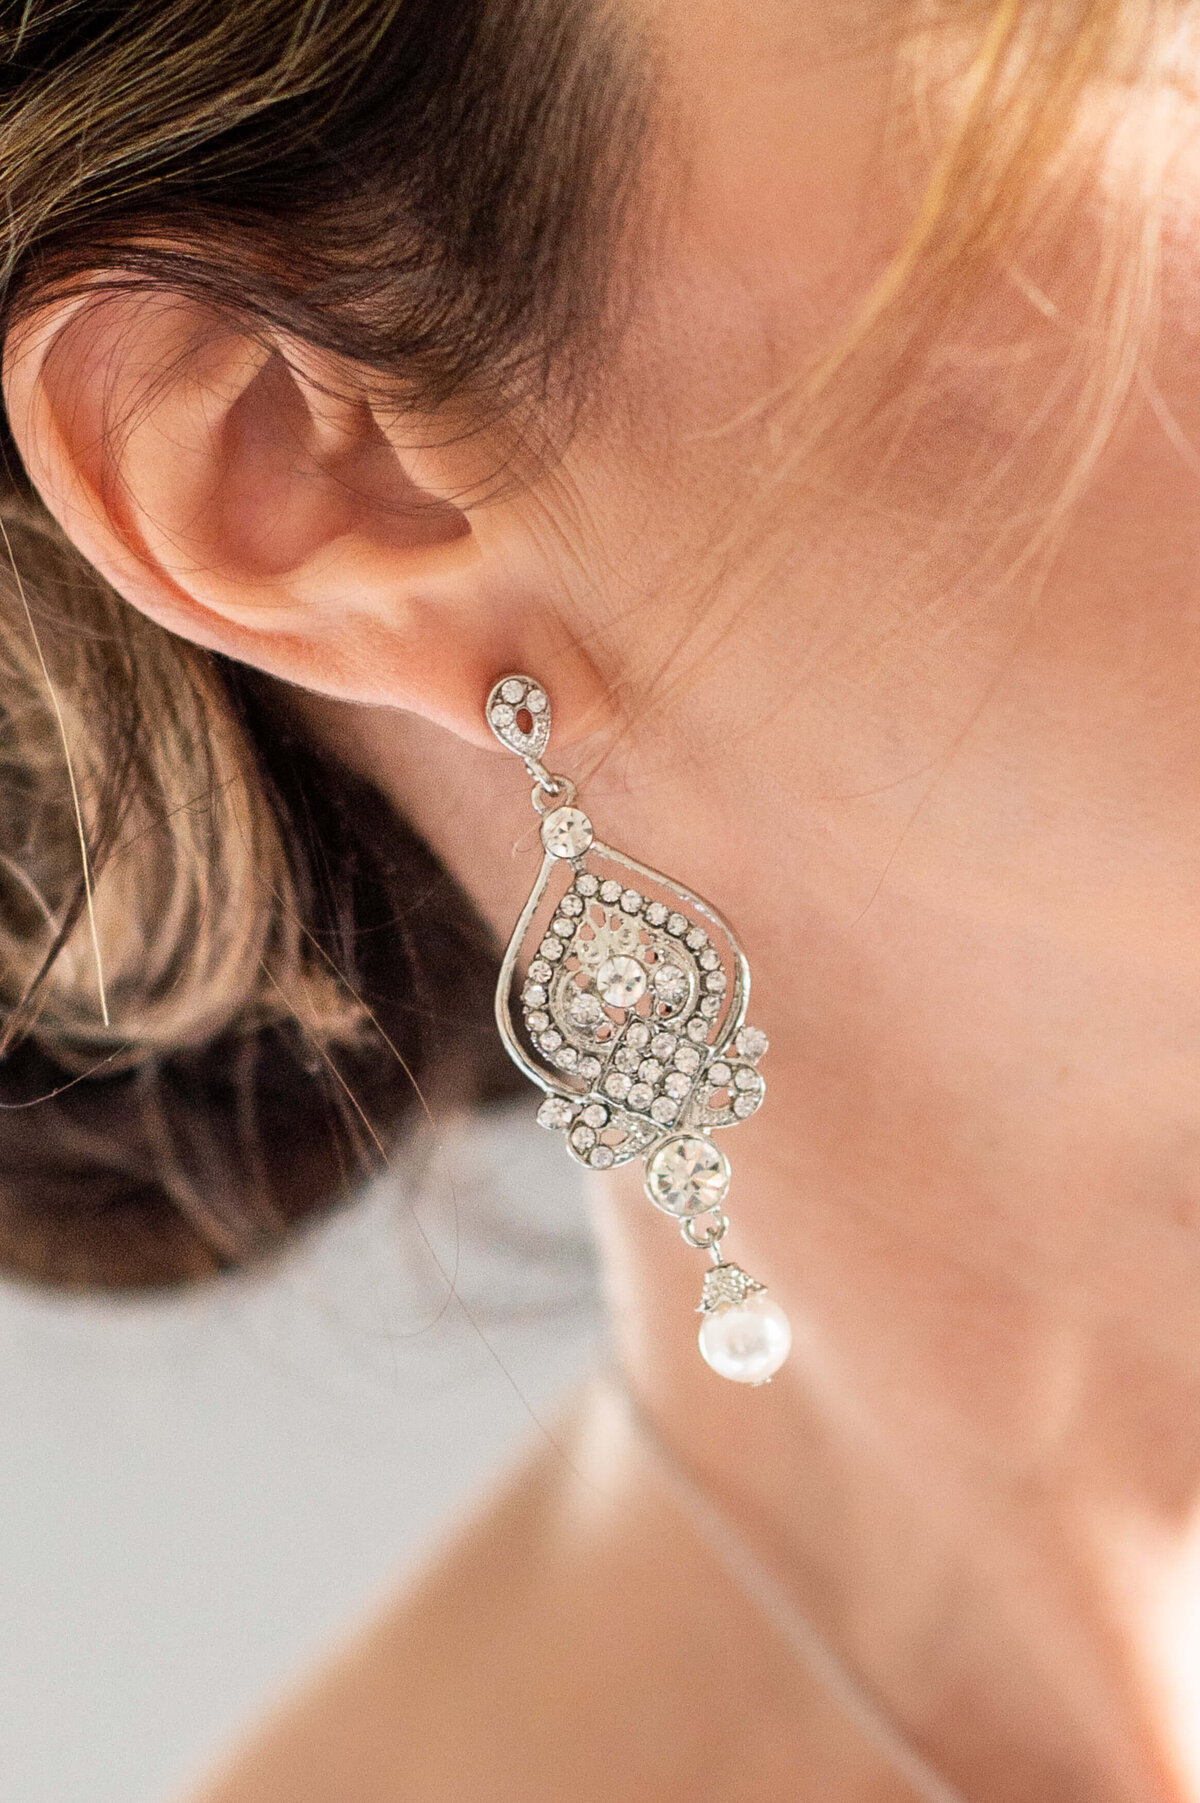 Ottawa wedding photography showing the closeup diamond and pearl details of a bride's earrings on her wedding day